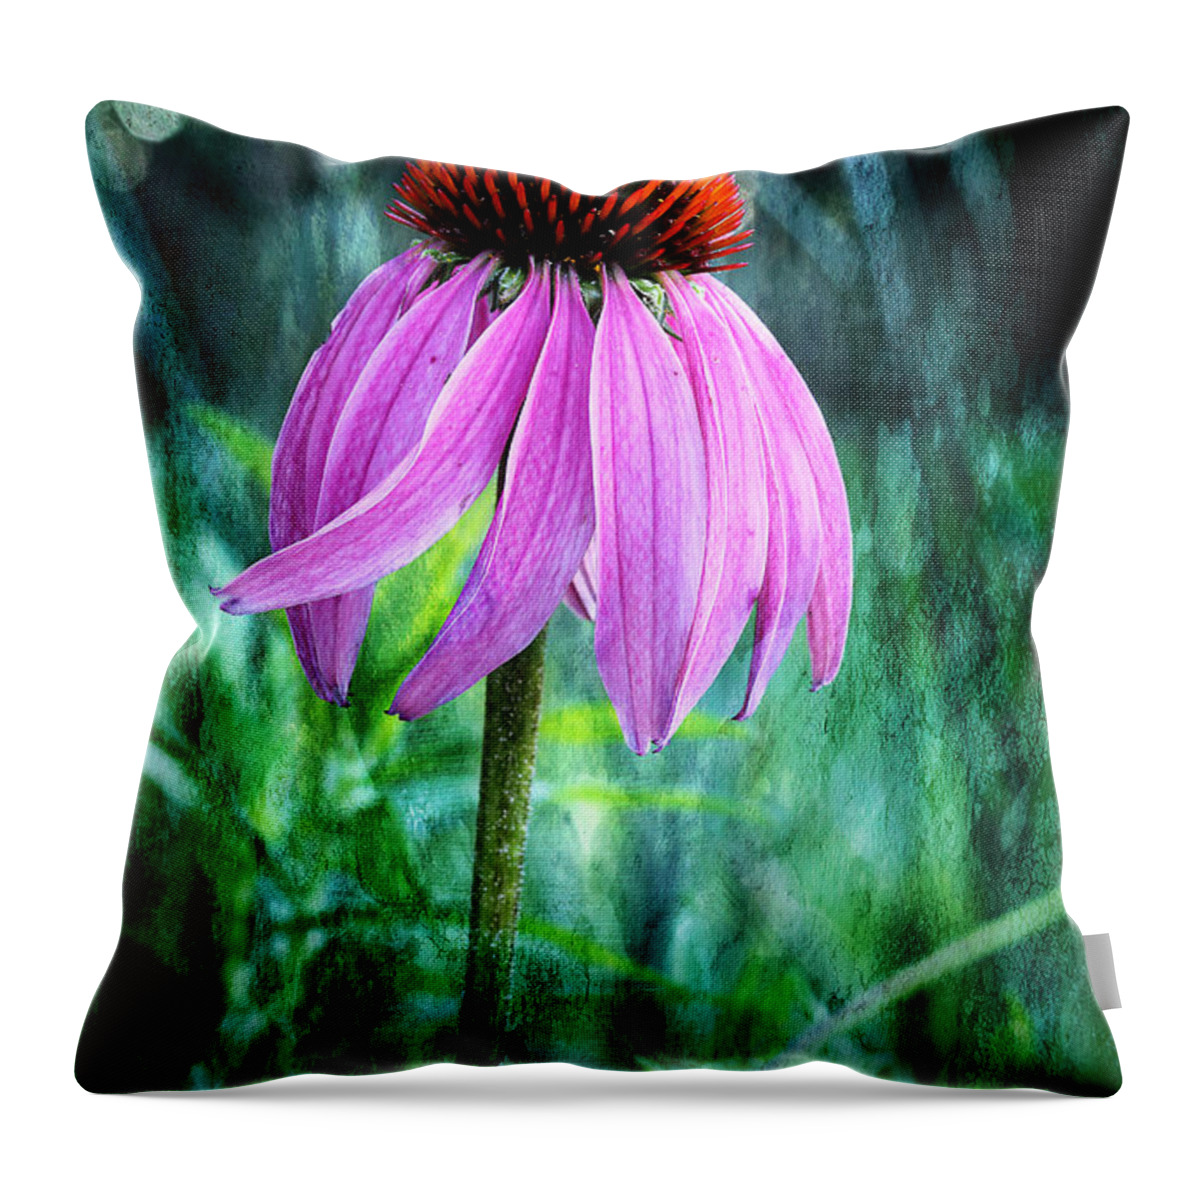 Pink Coneflower Throw Pillow featuring the photograph Growing Wild And Free by Michael Eingle